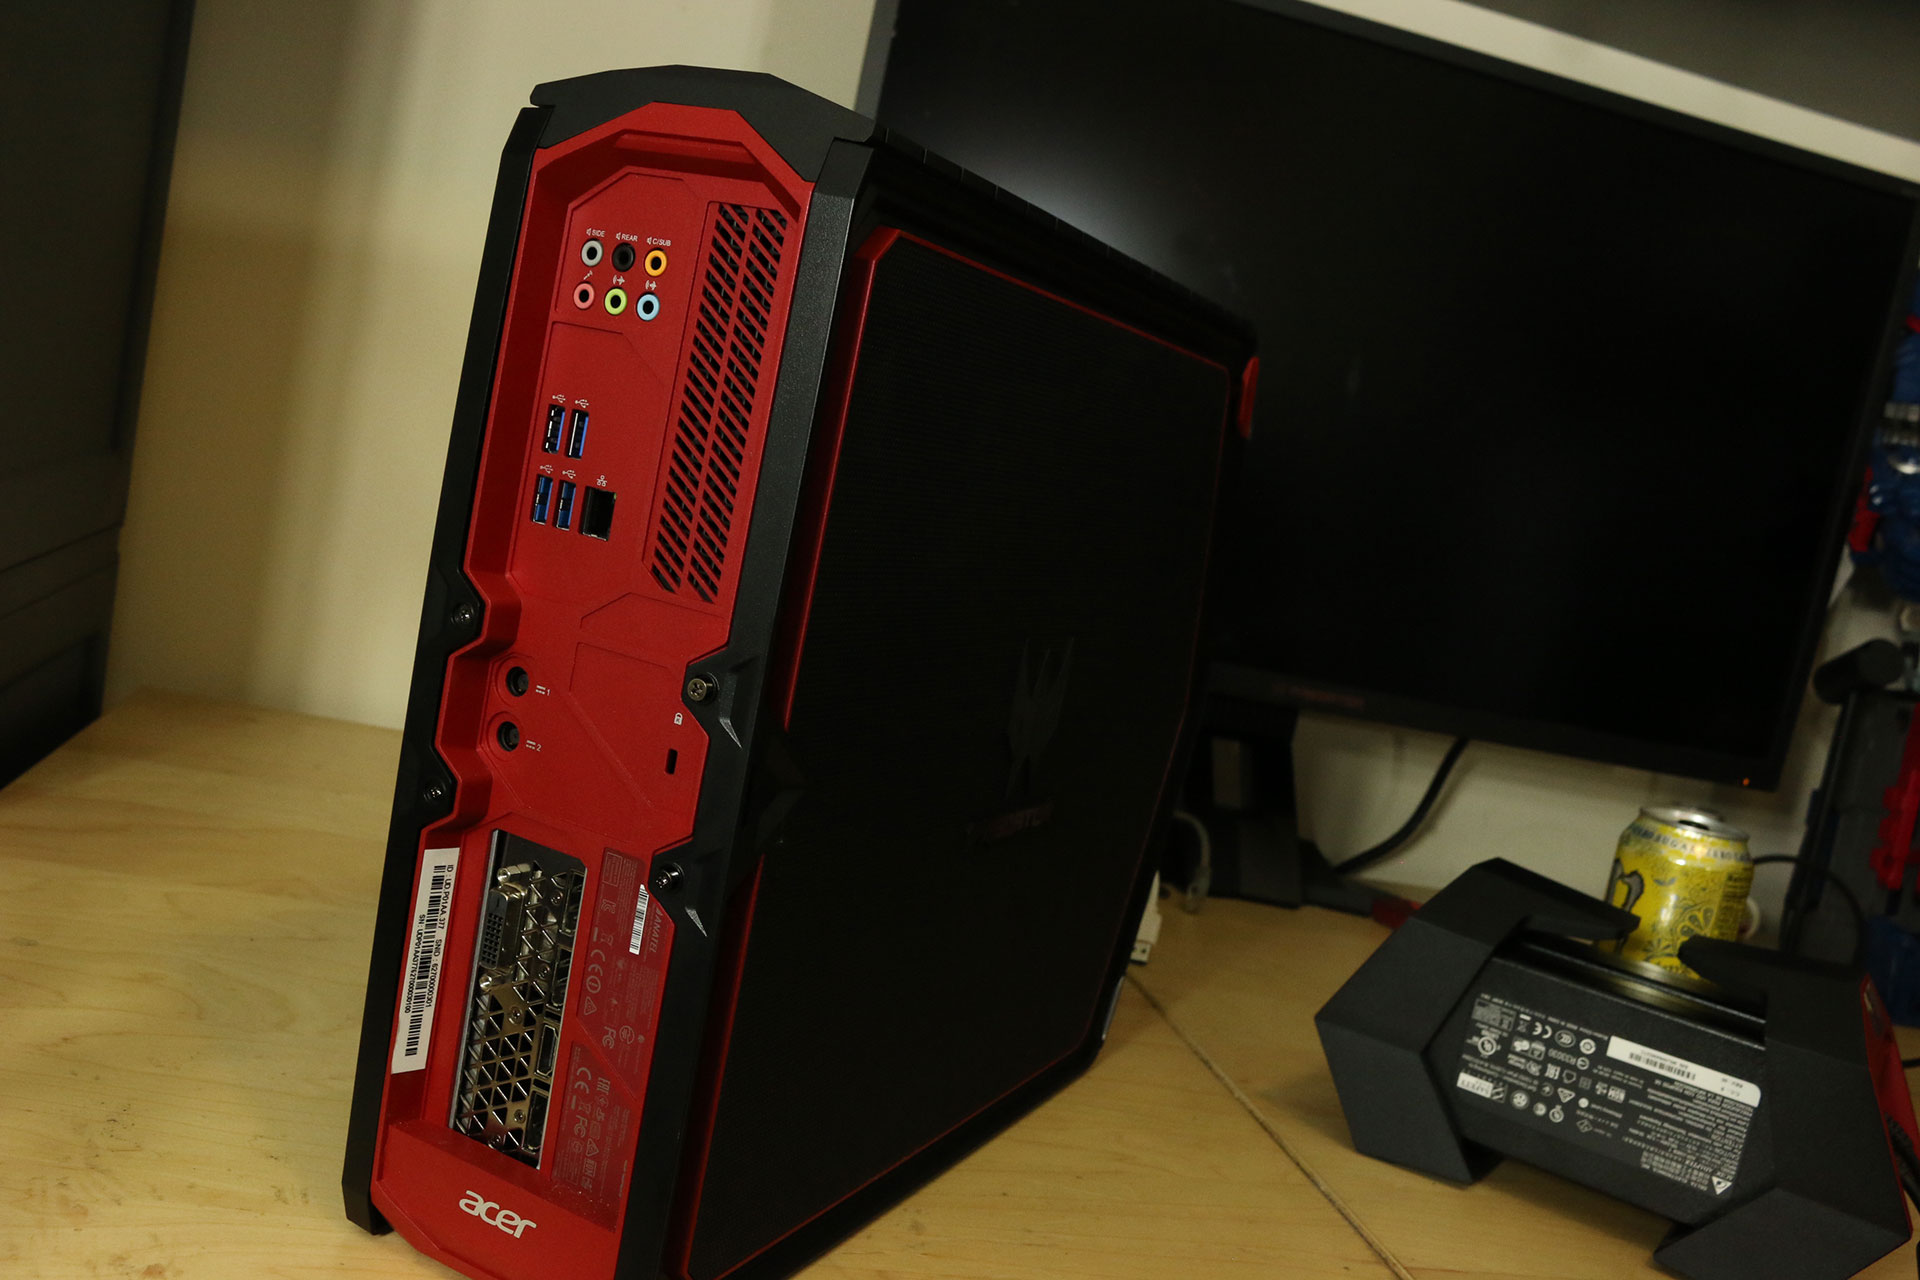 Acer Predator G1 Gaming PC Review: Small But Mighty